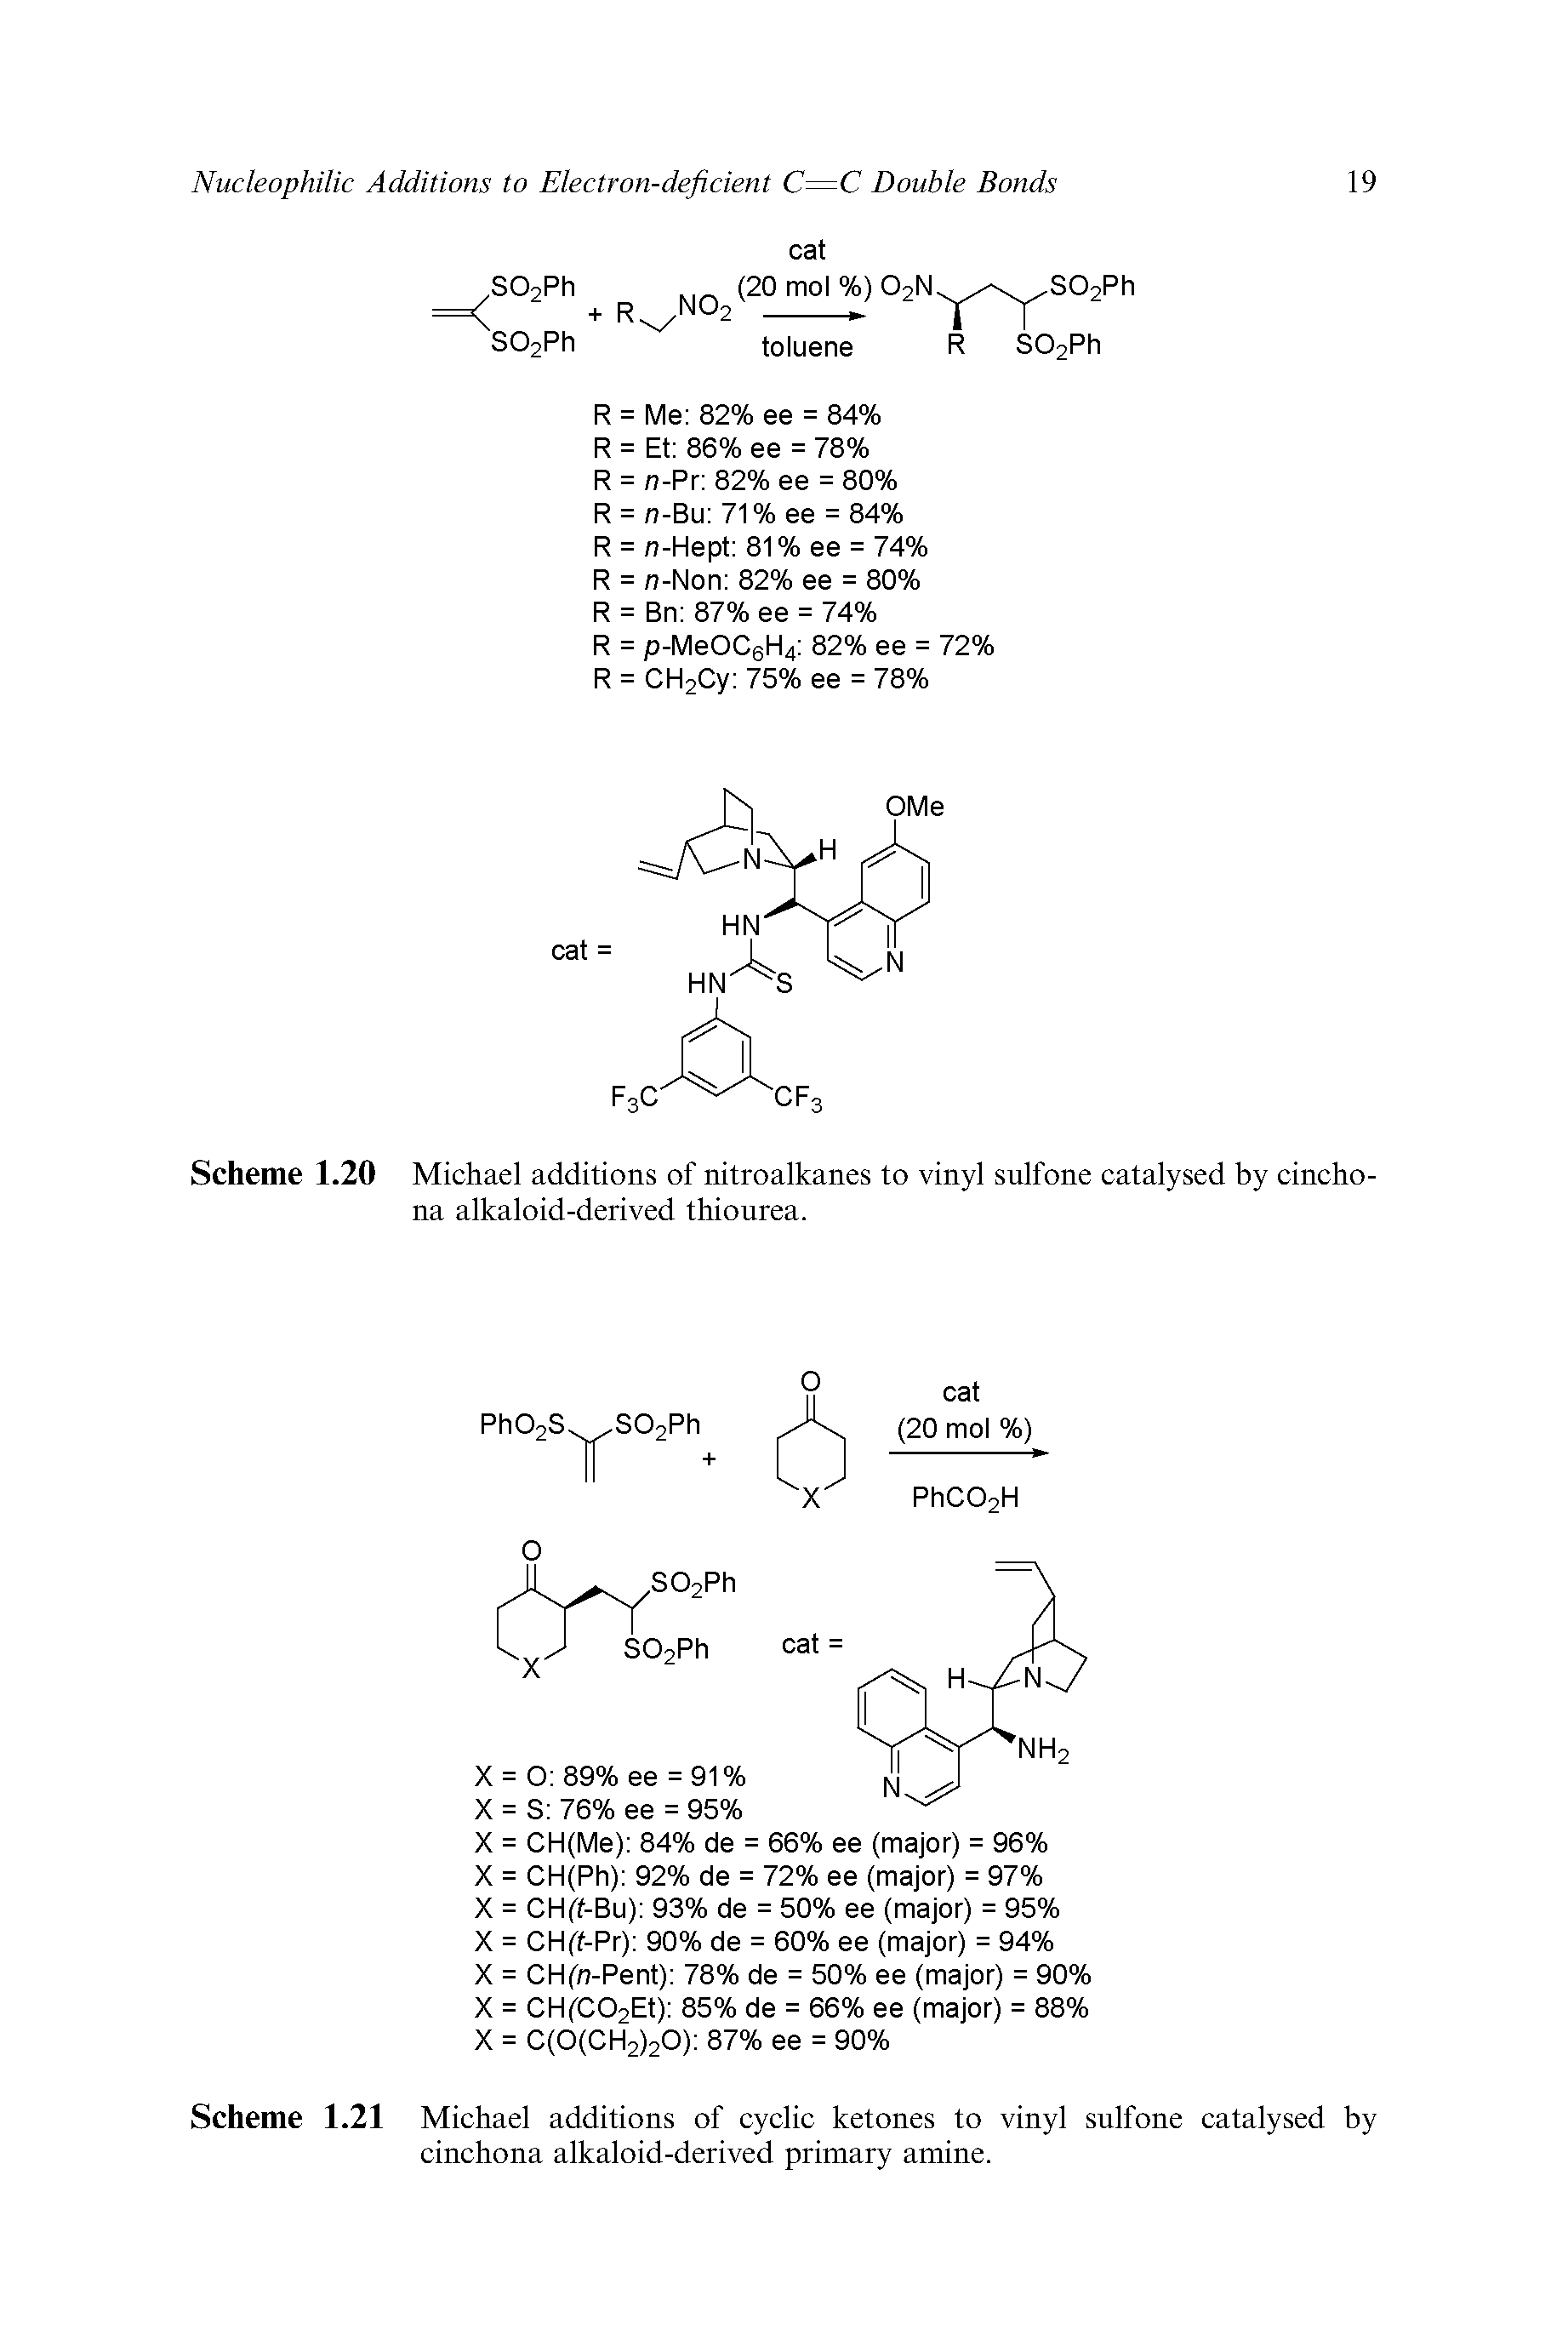 Scheme 1.21 Michael additions of cyclic ketones to vinyl sulfone catalysed by cinchona alkaloid-derived primary amine.